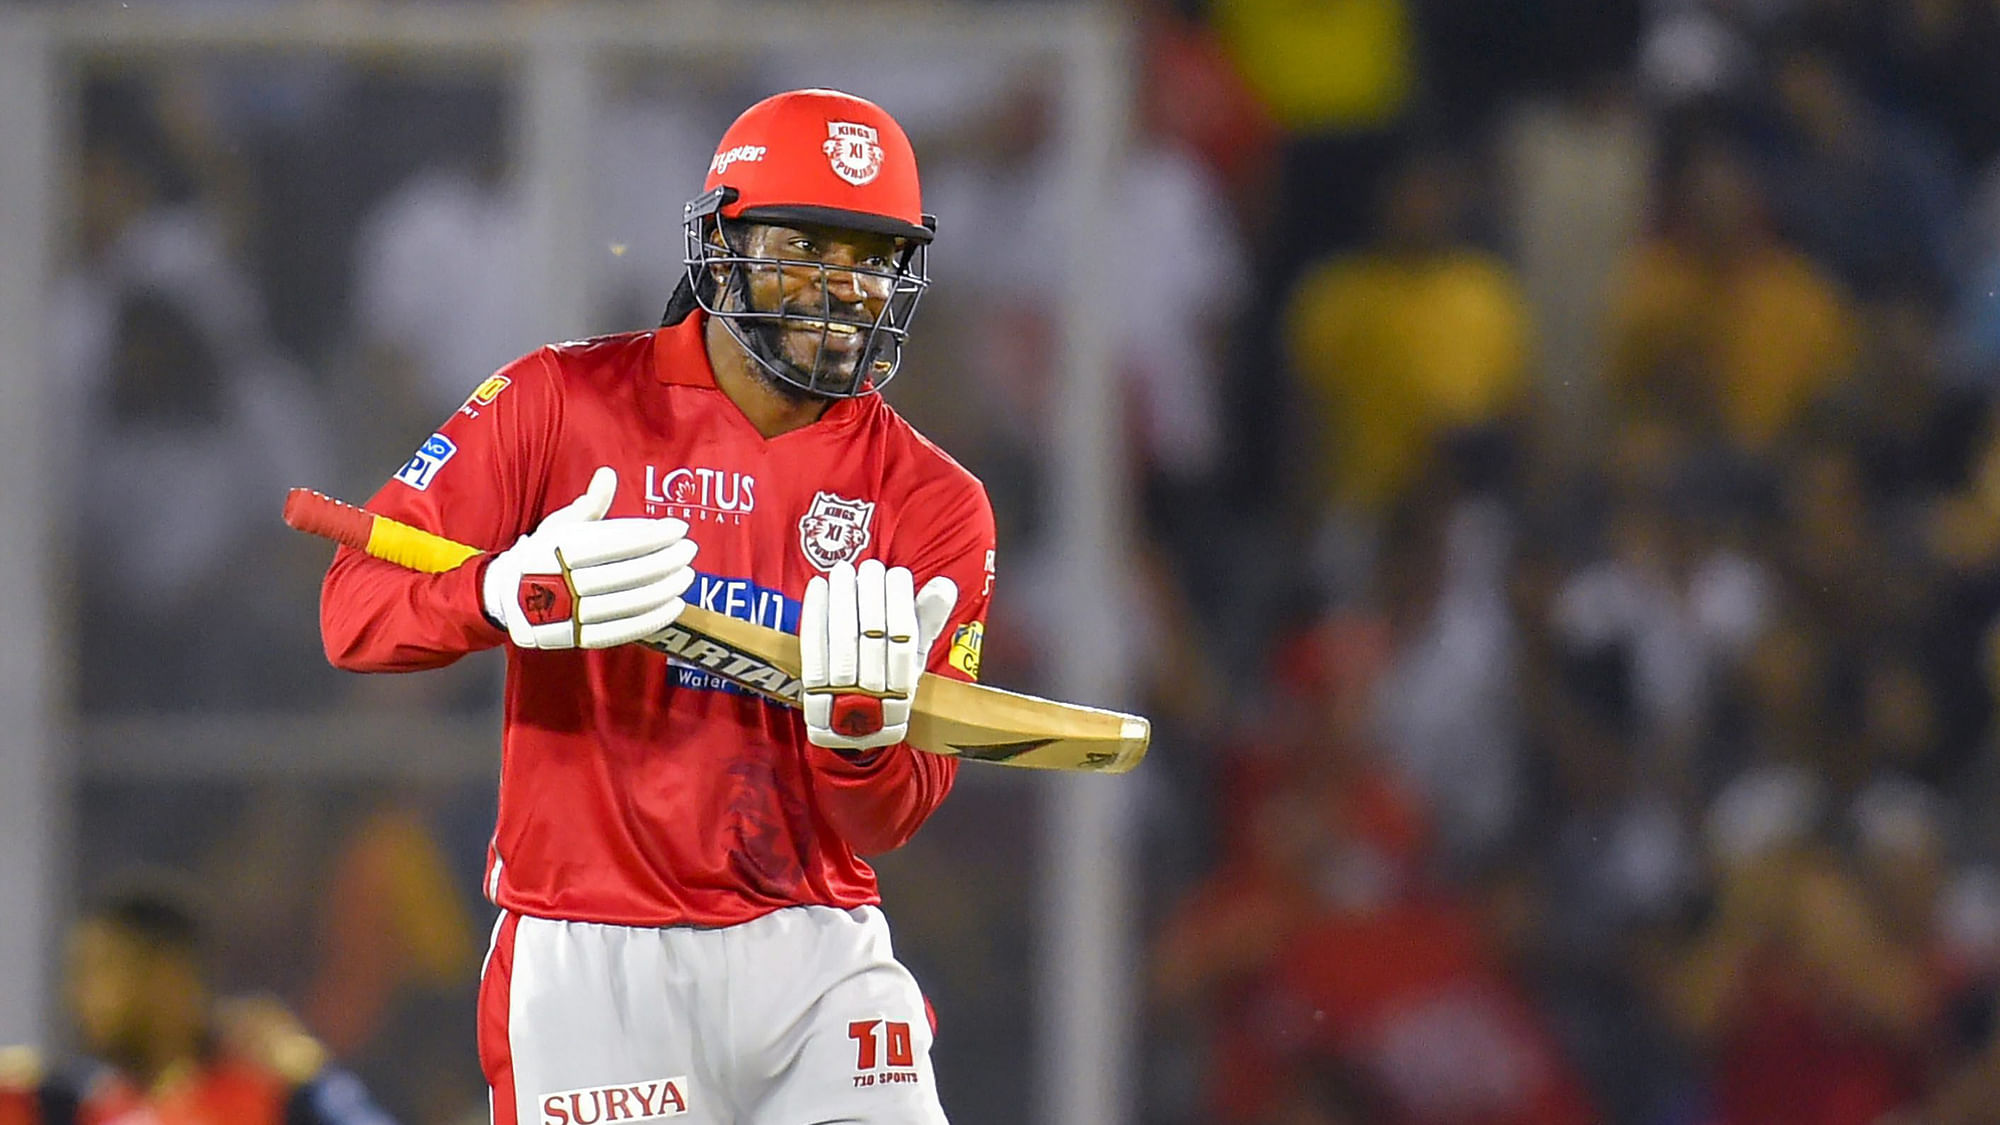 West Indies batting star Chris Gayle has not featured in either of the IPL matches that KXIP have played so far.